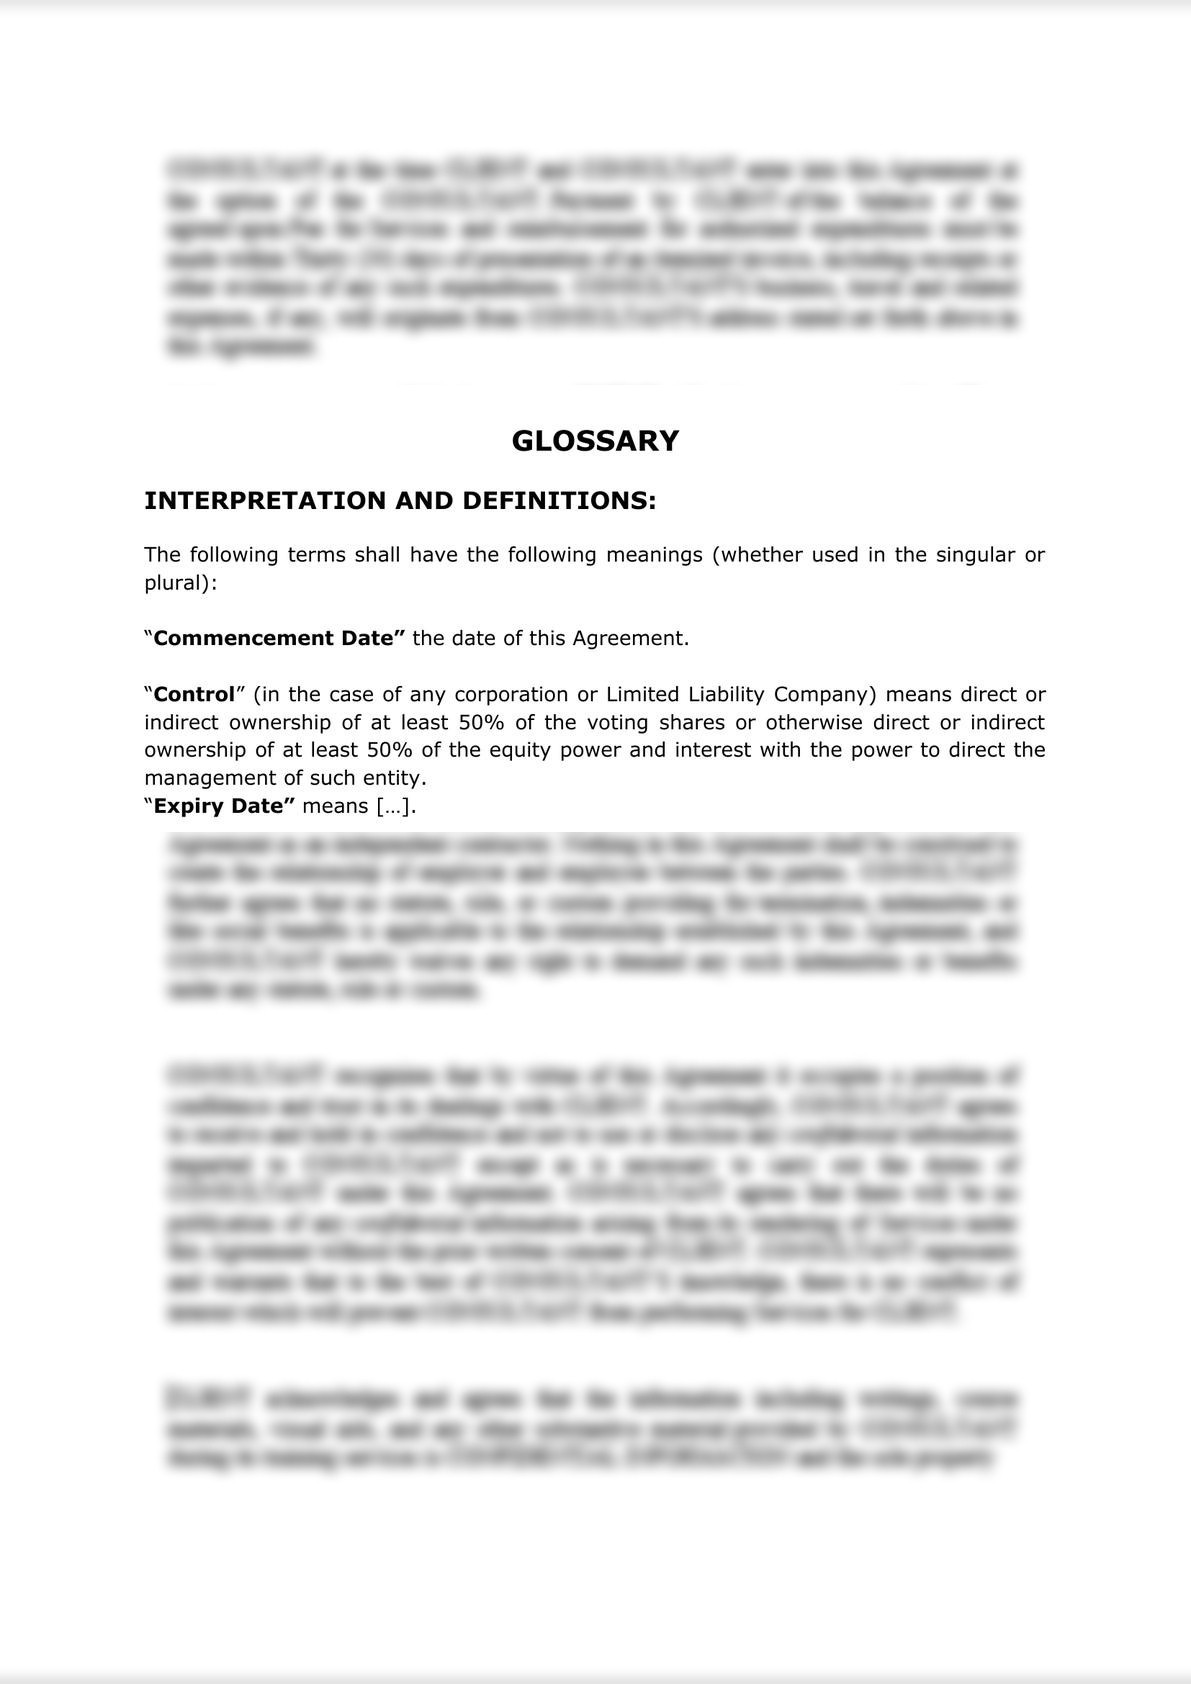 RESEARCH AND DEVELOPMENT AGREEMENT-7